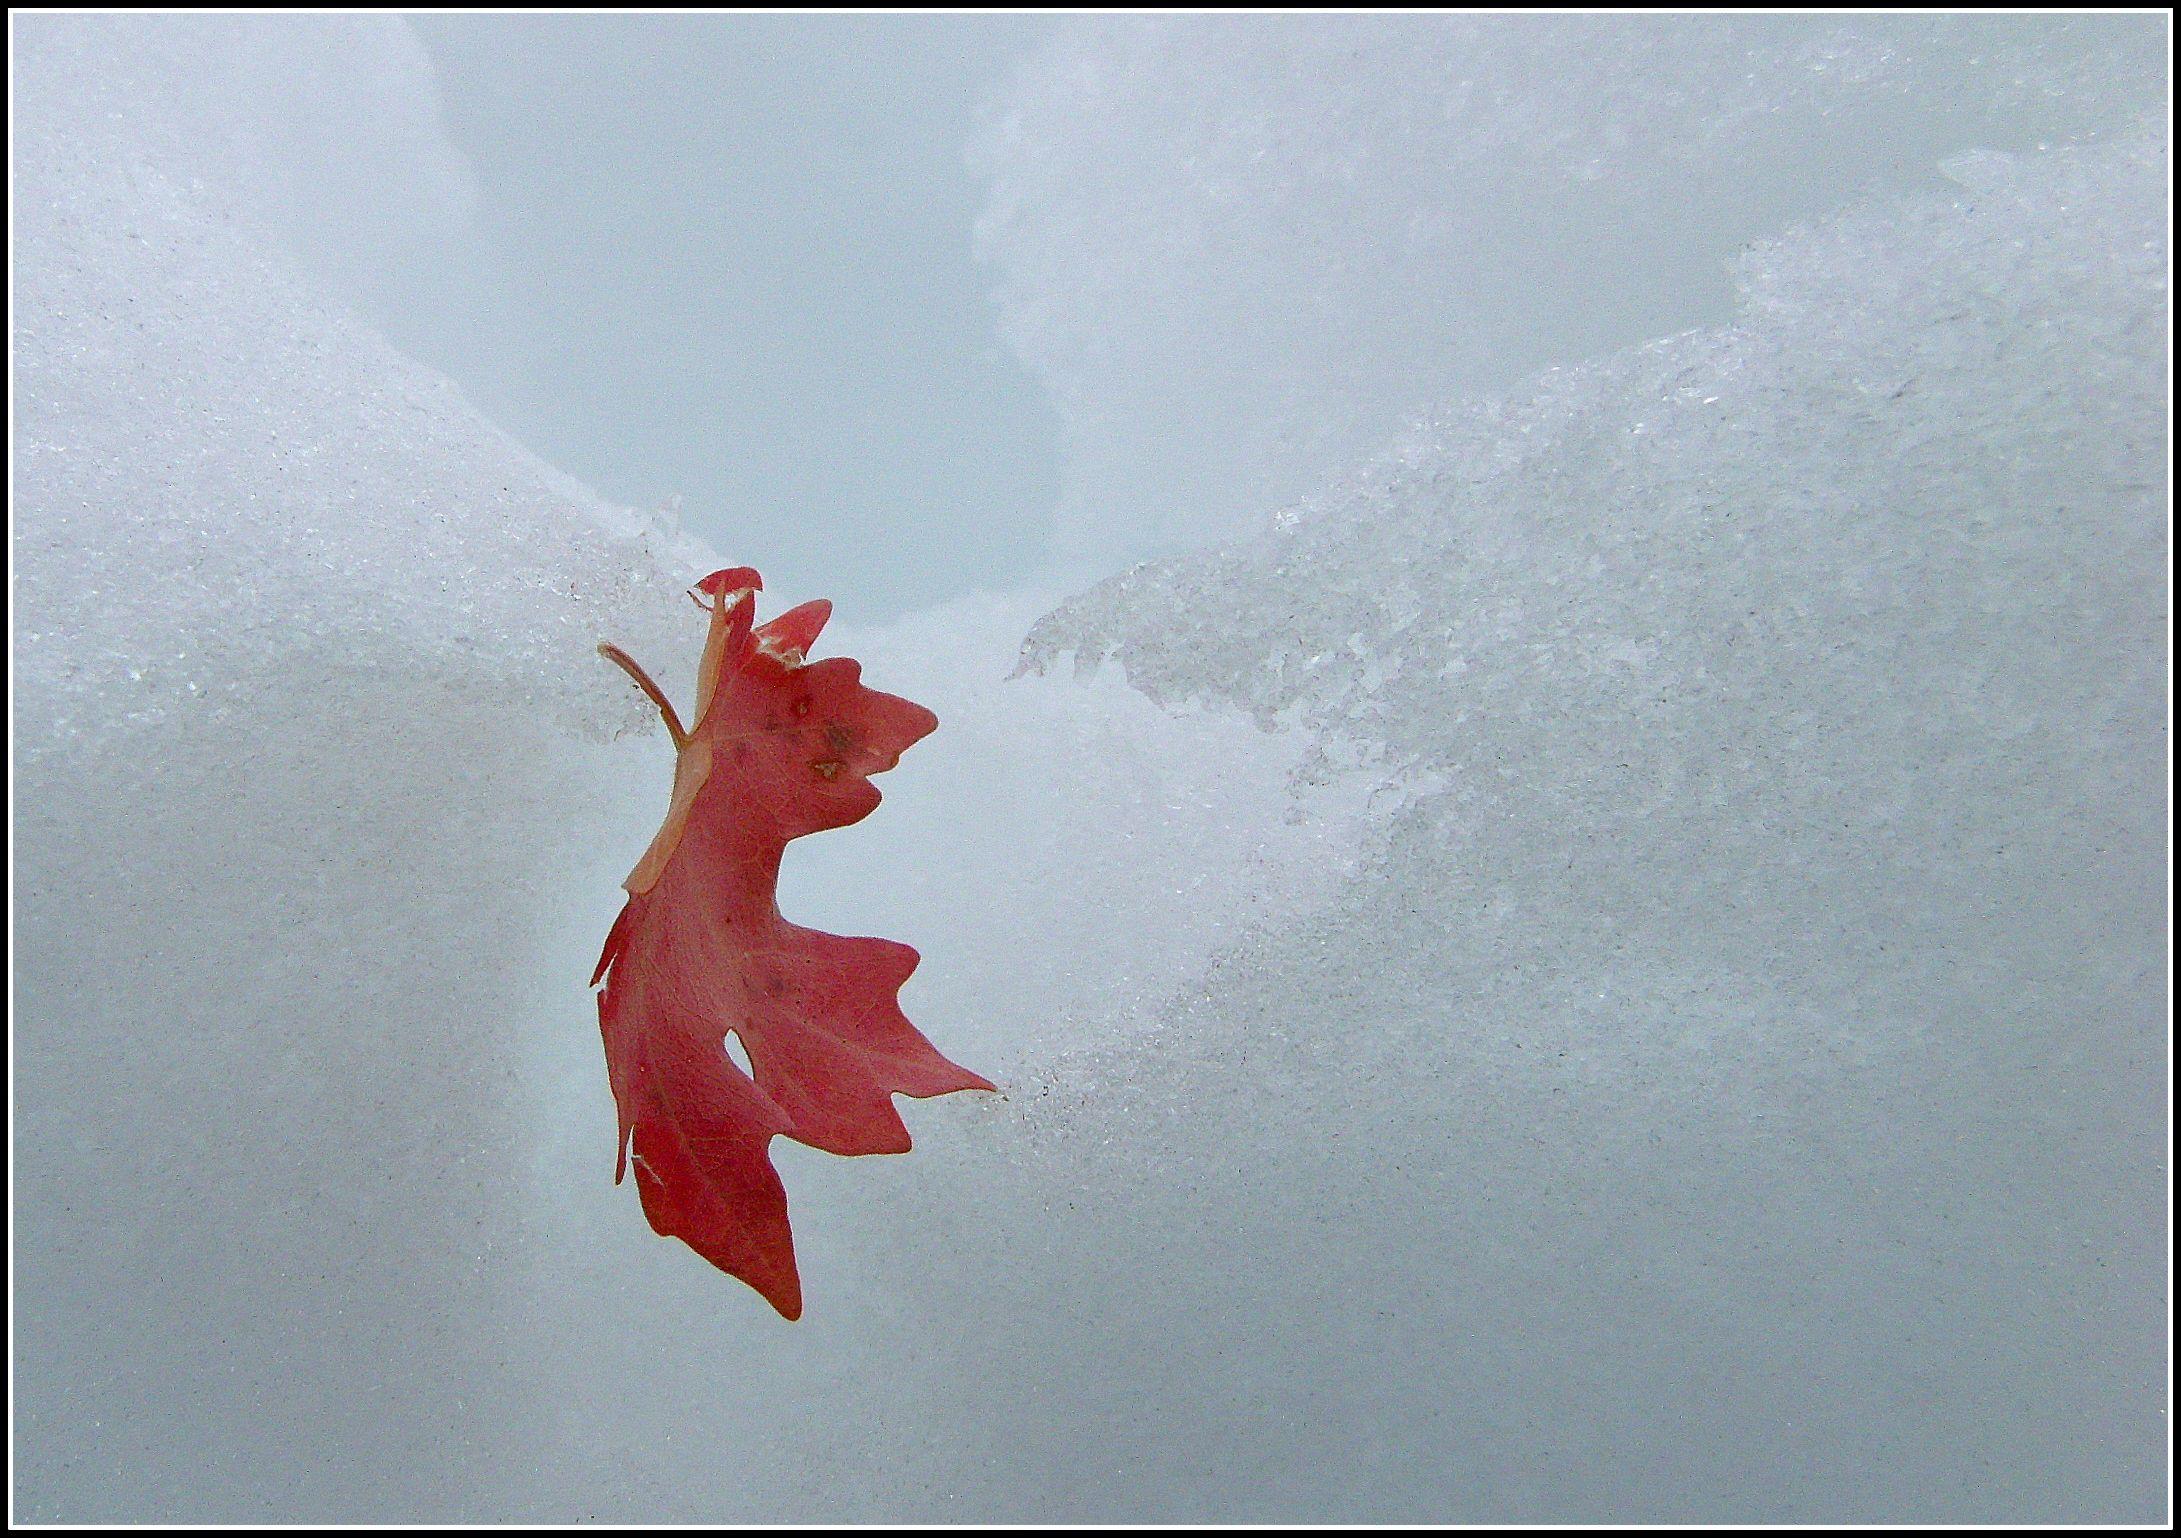 Red Maple Leaf of a Word Logo - Maple leaf in snow. Scott's Place.image and Words